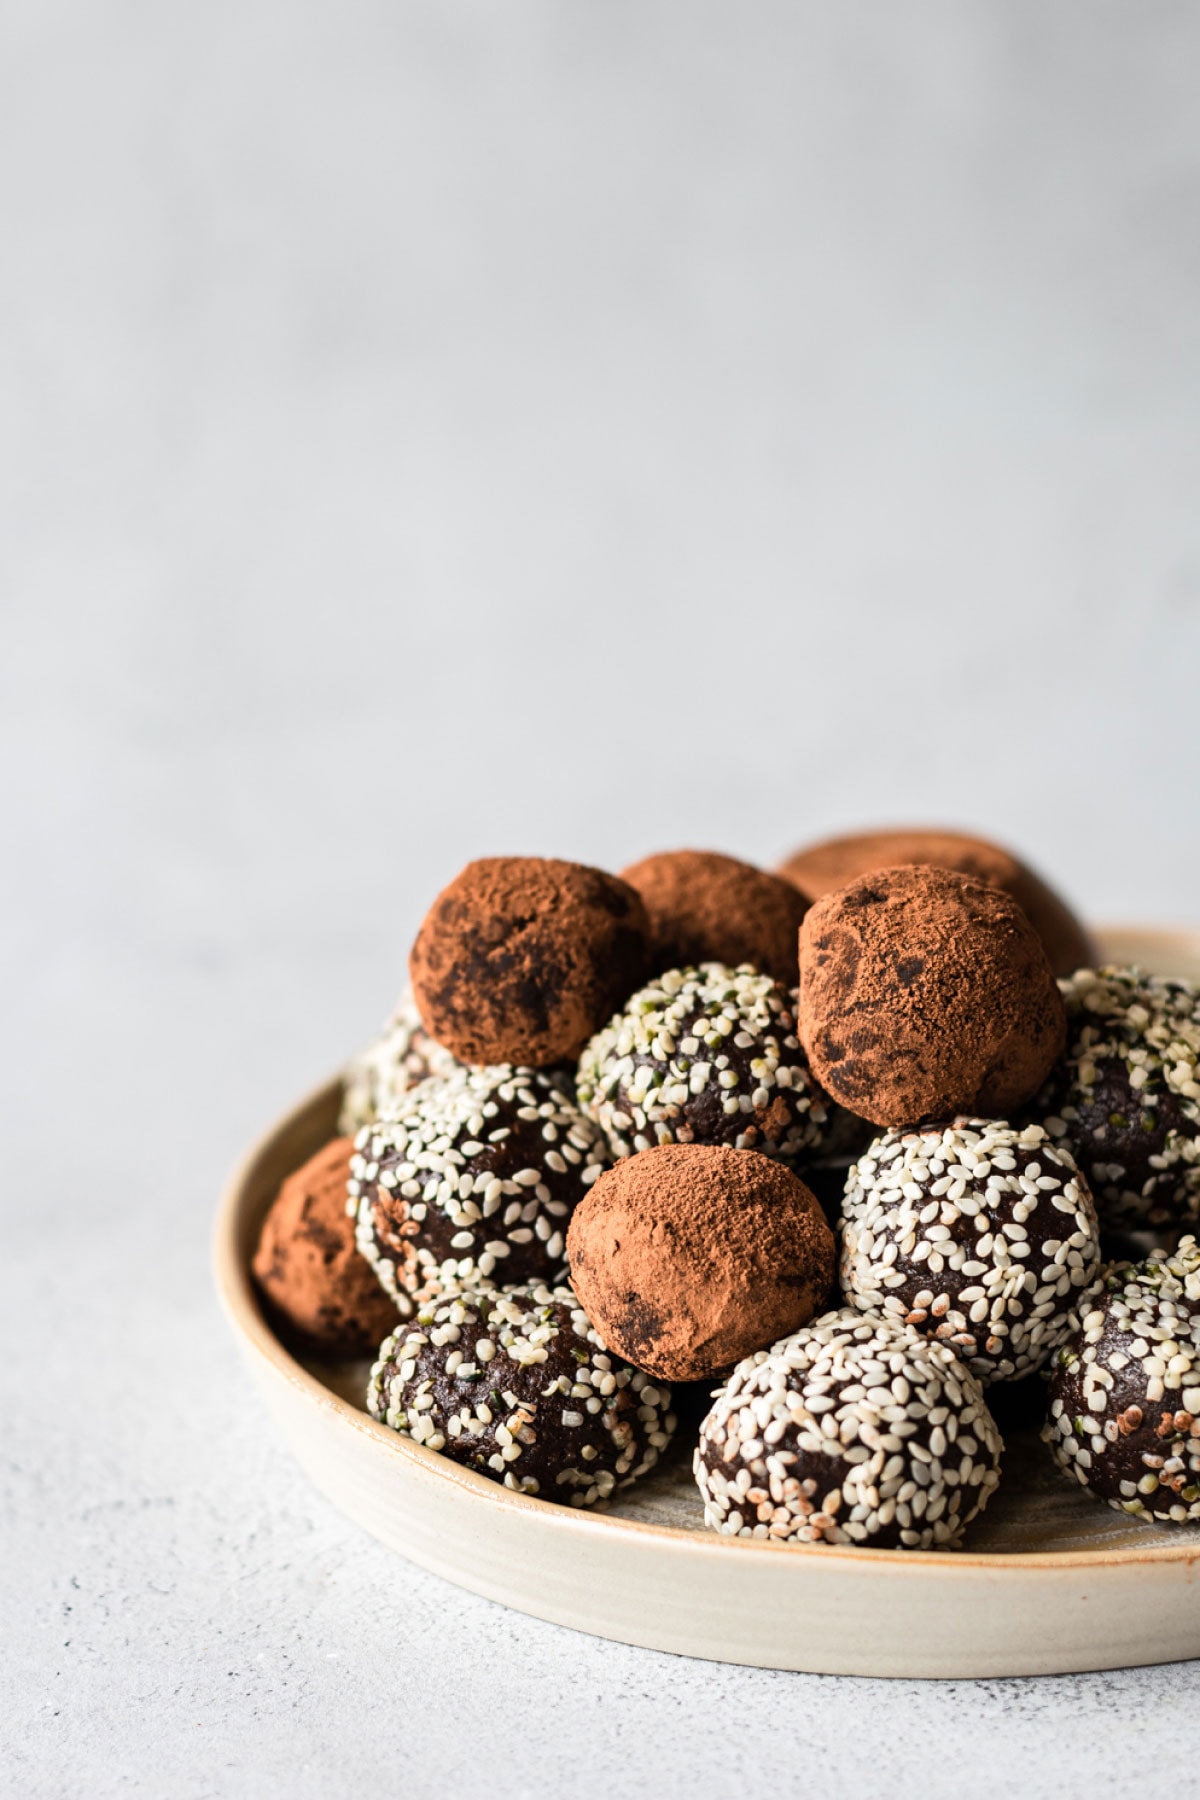 Chocolate Tahini Bliss Balls | The Crooked Carrot